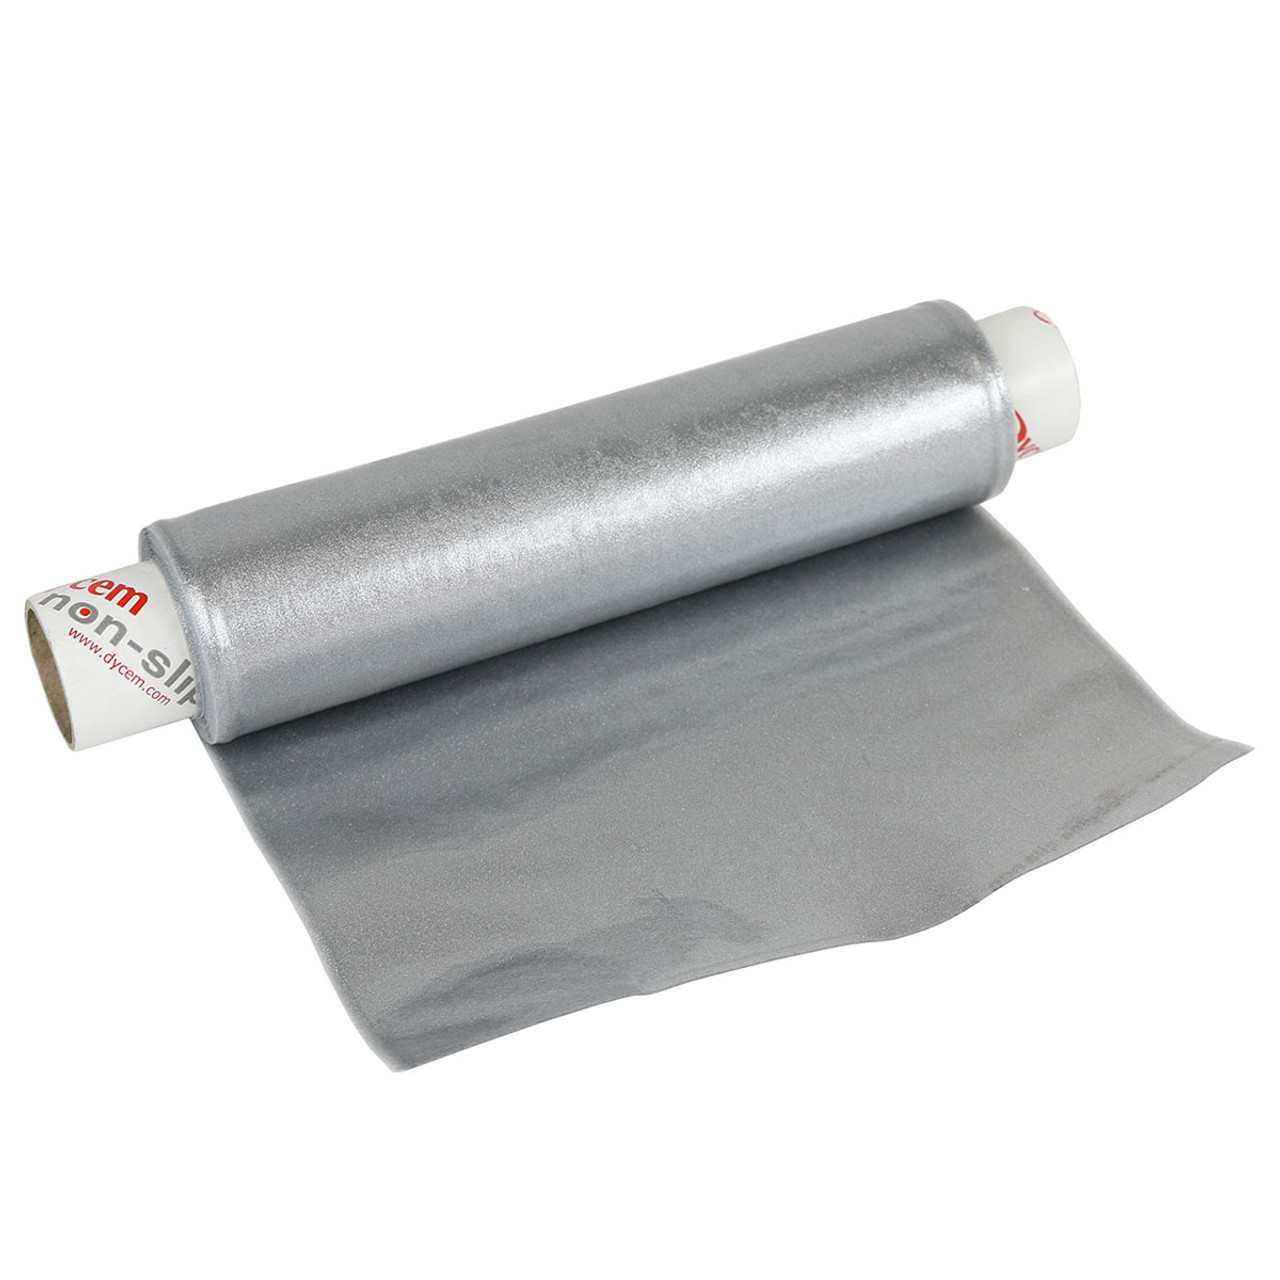 Dycem¨ non-slip material, roll, 8"x6-1/2 foot, silver